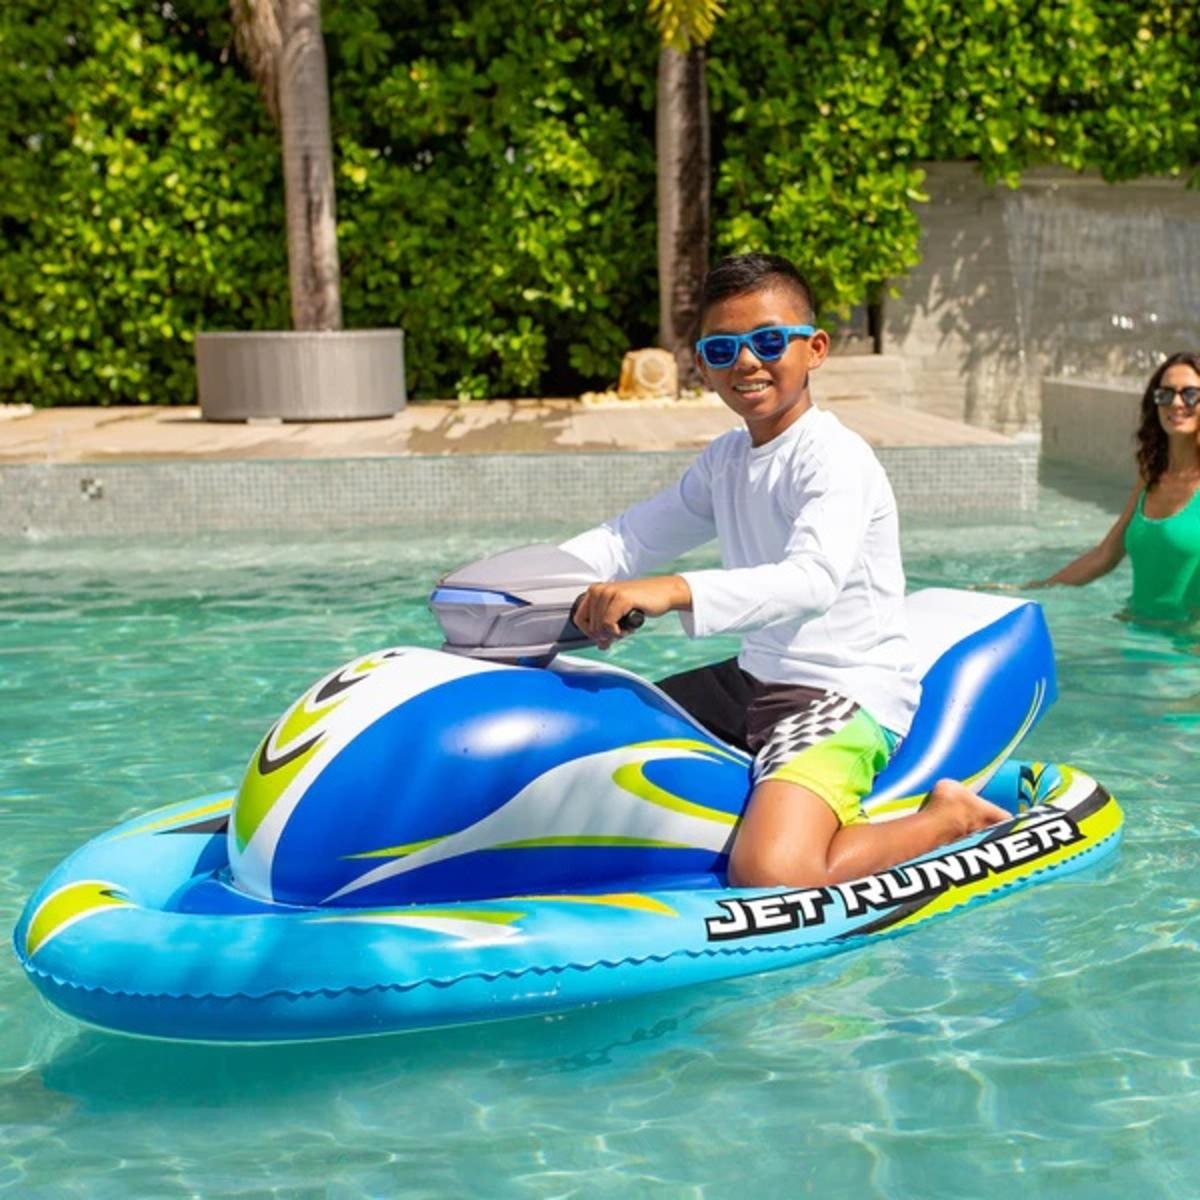 Jet Runner - Motorized Inflatable Kids Water Craft by PoolCandy